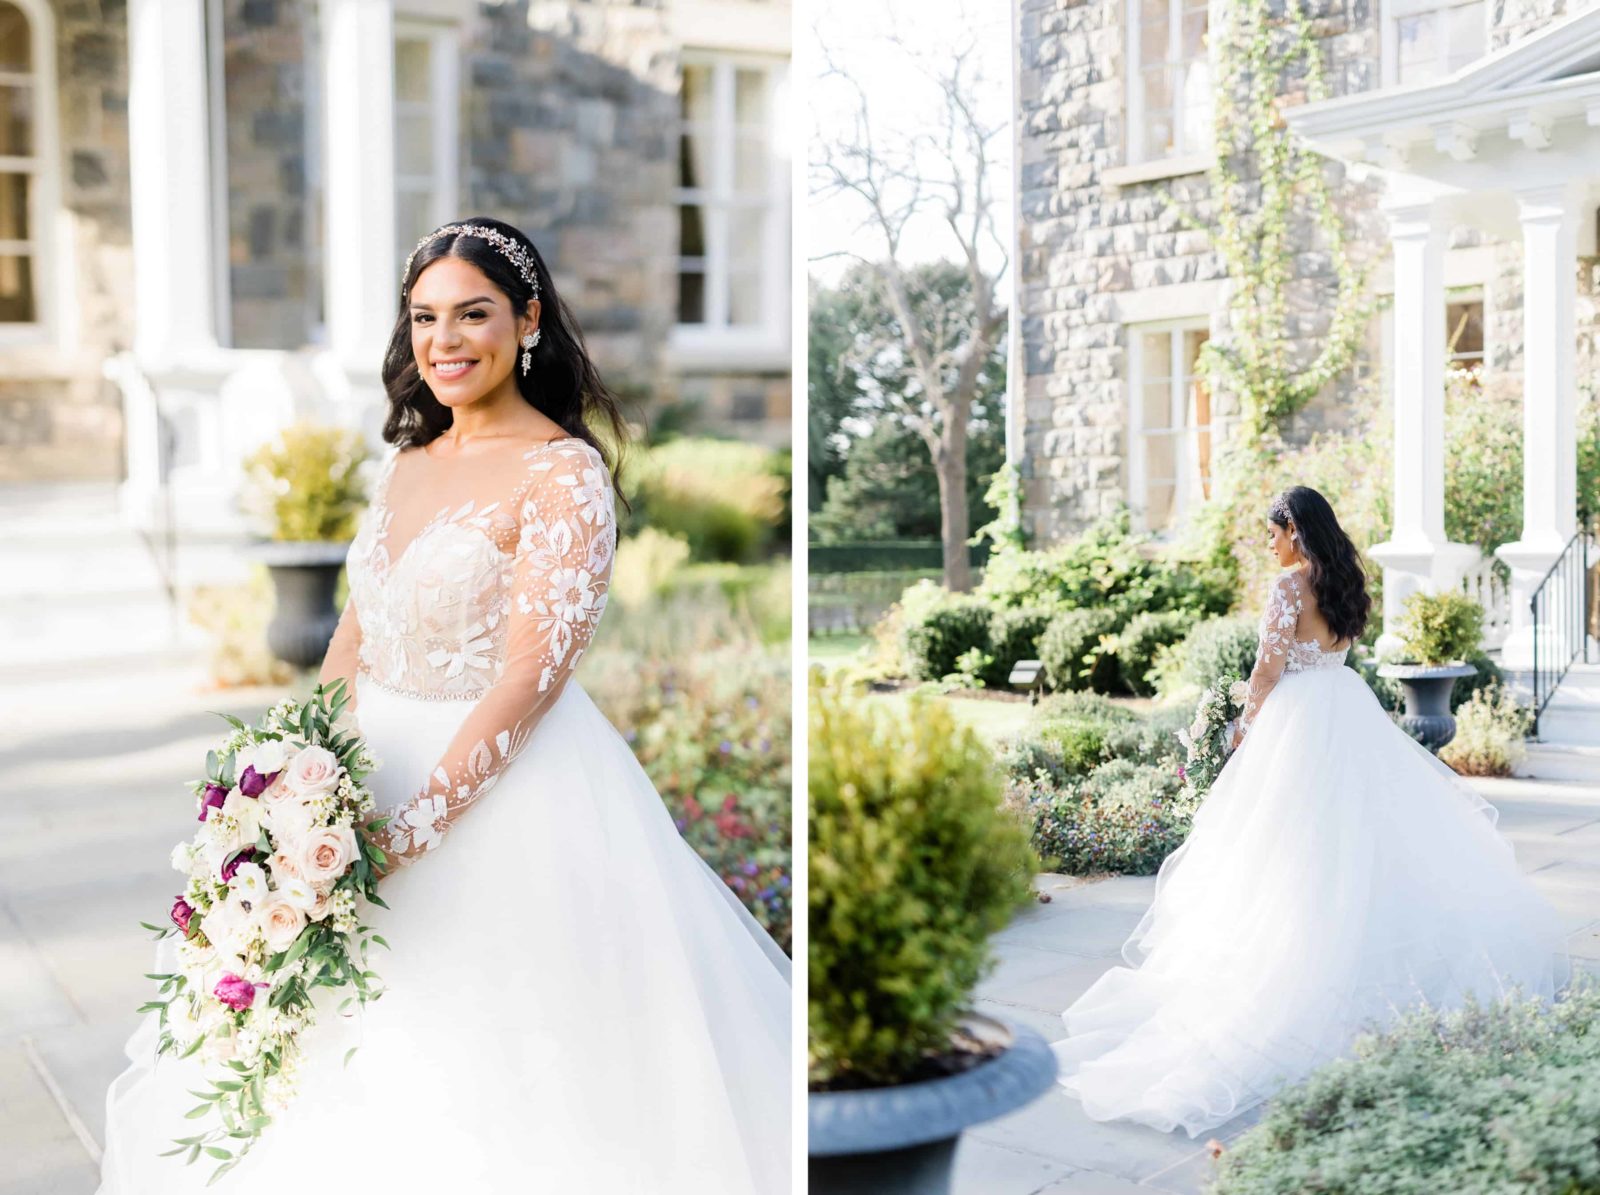 Bridal portraits in front of the house, with bride wearing tulle and lace dress